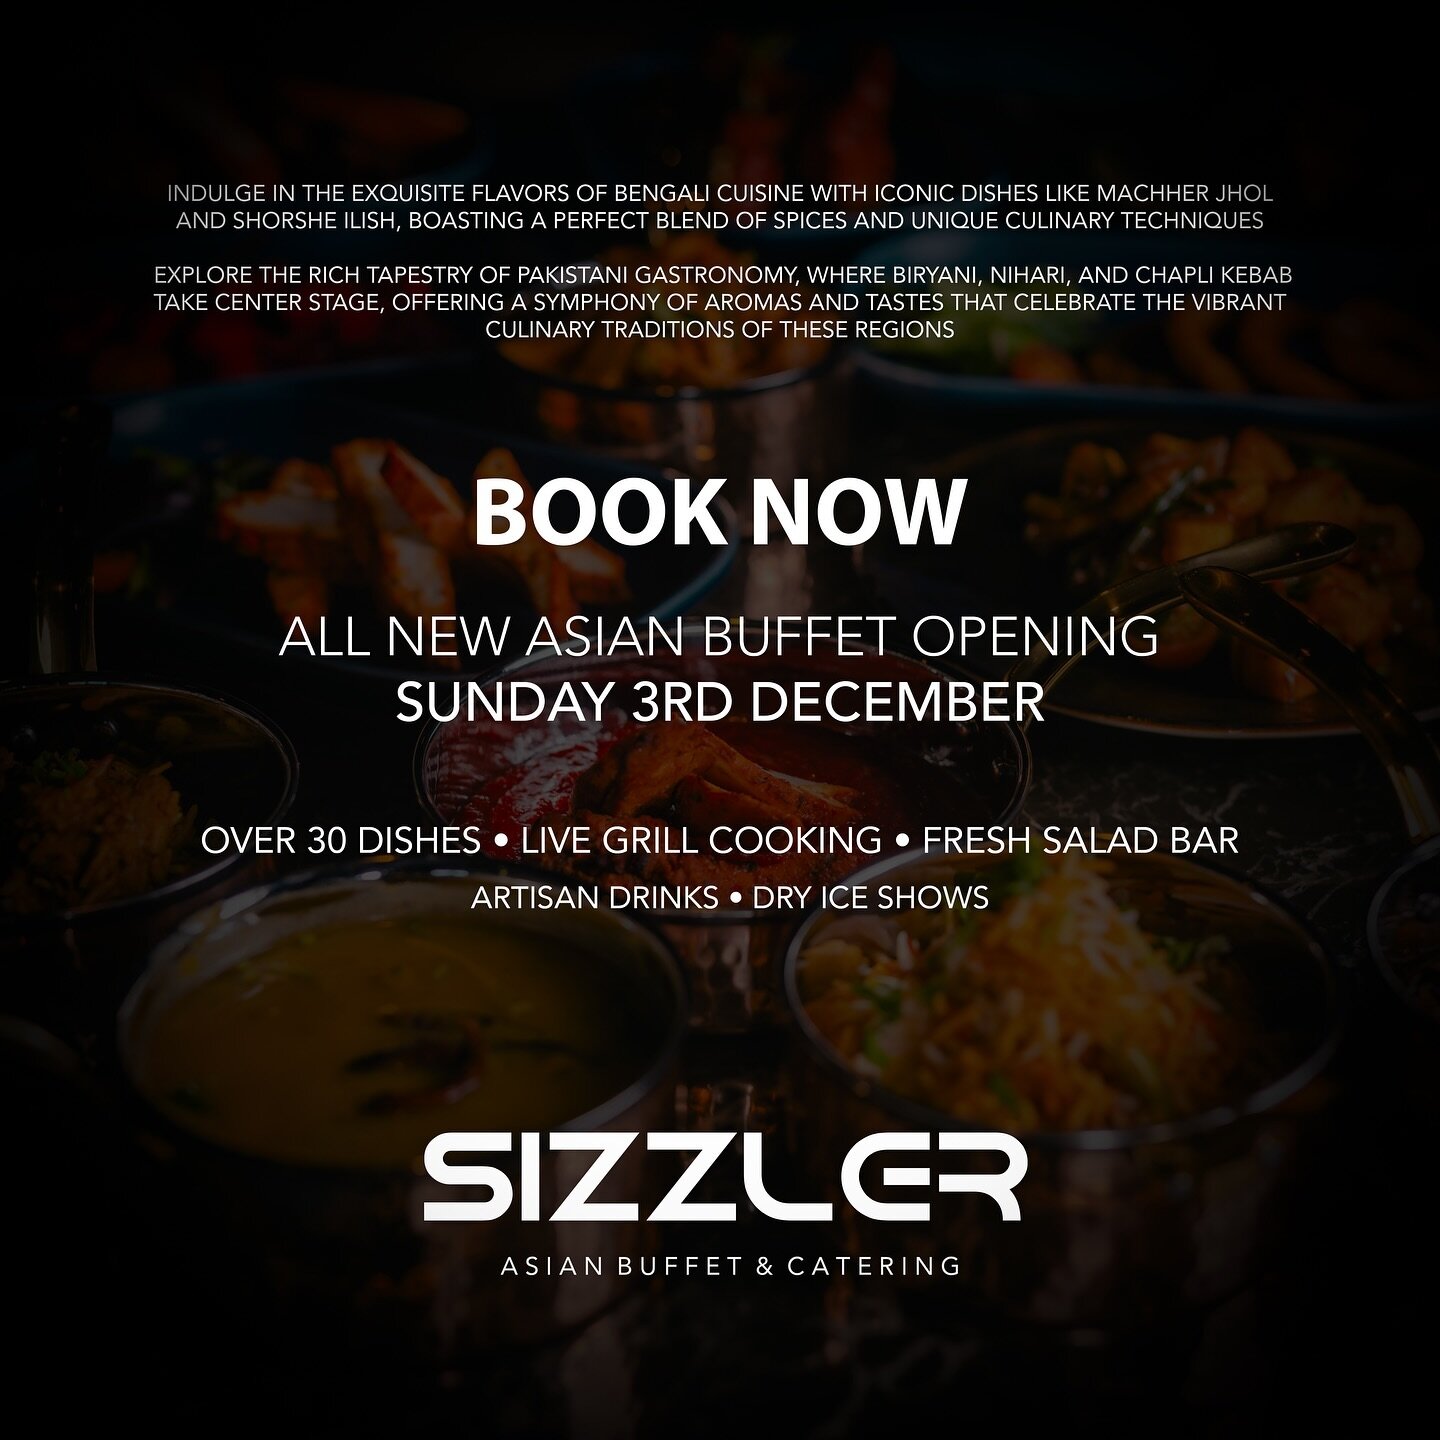 Welcome to a brand new captivating experience of Asian buffet dining, where an exquisite selection of dishes from the heart of Bangladesh, Pakistan, and India awaits your discerning palate. Immerse yourself in a feast of flavors, featuring culinary d